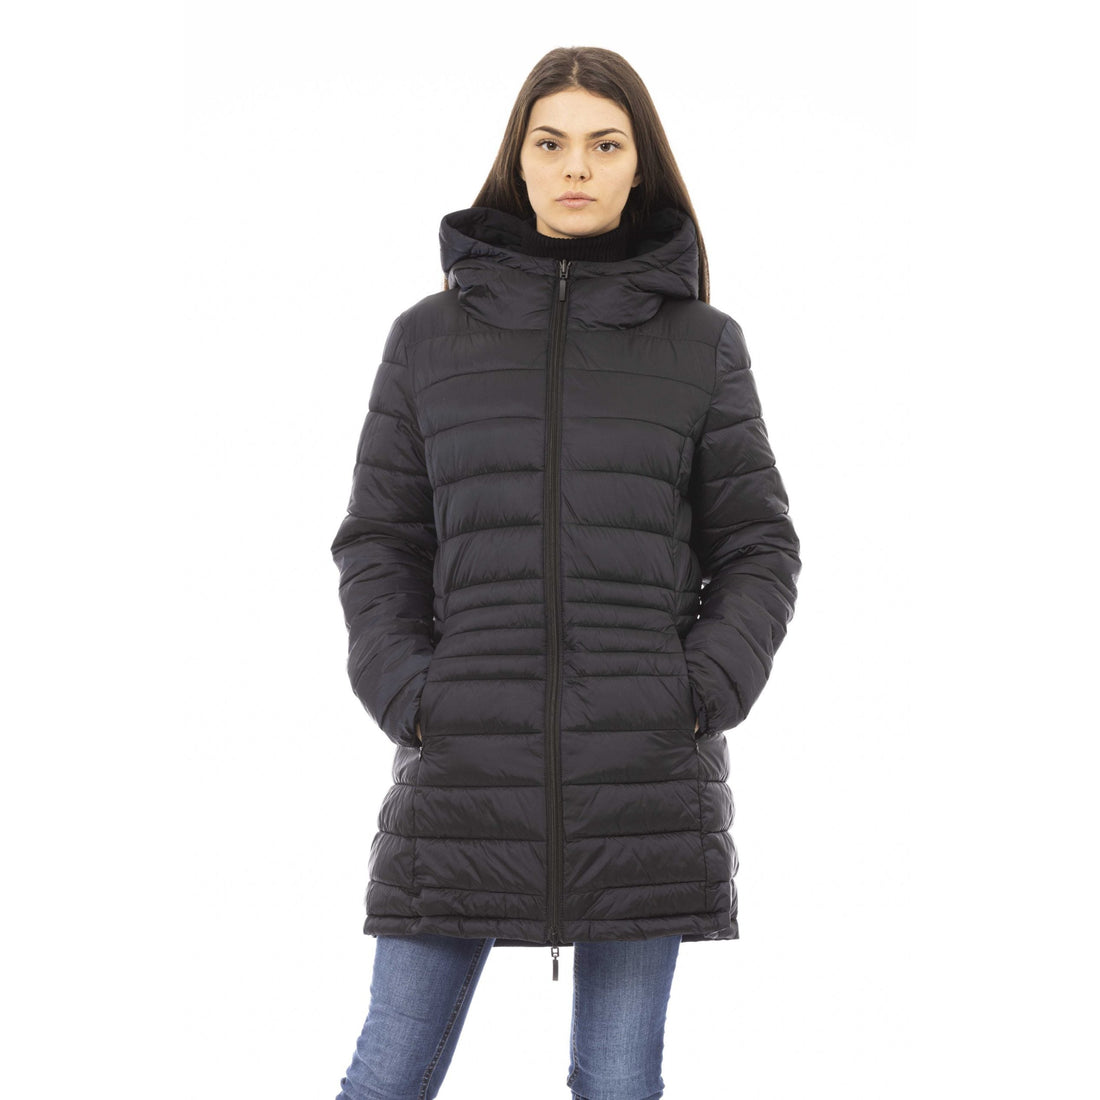 Baldinini Trend Chic Double-Faced Down Jacket with Monogram